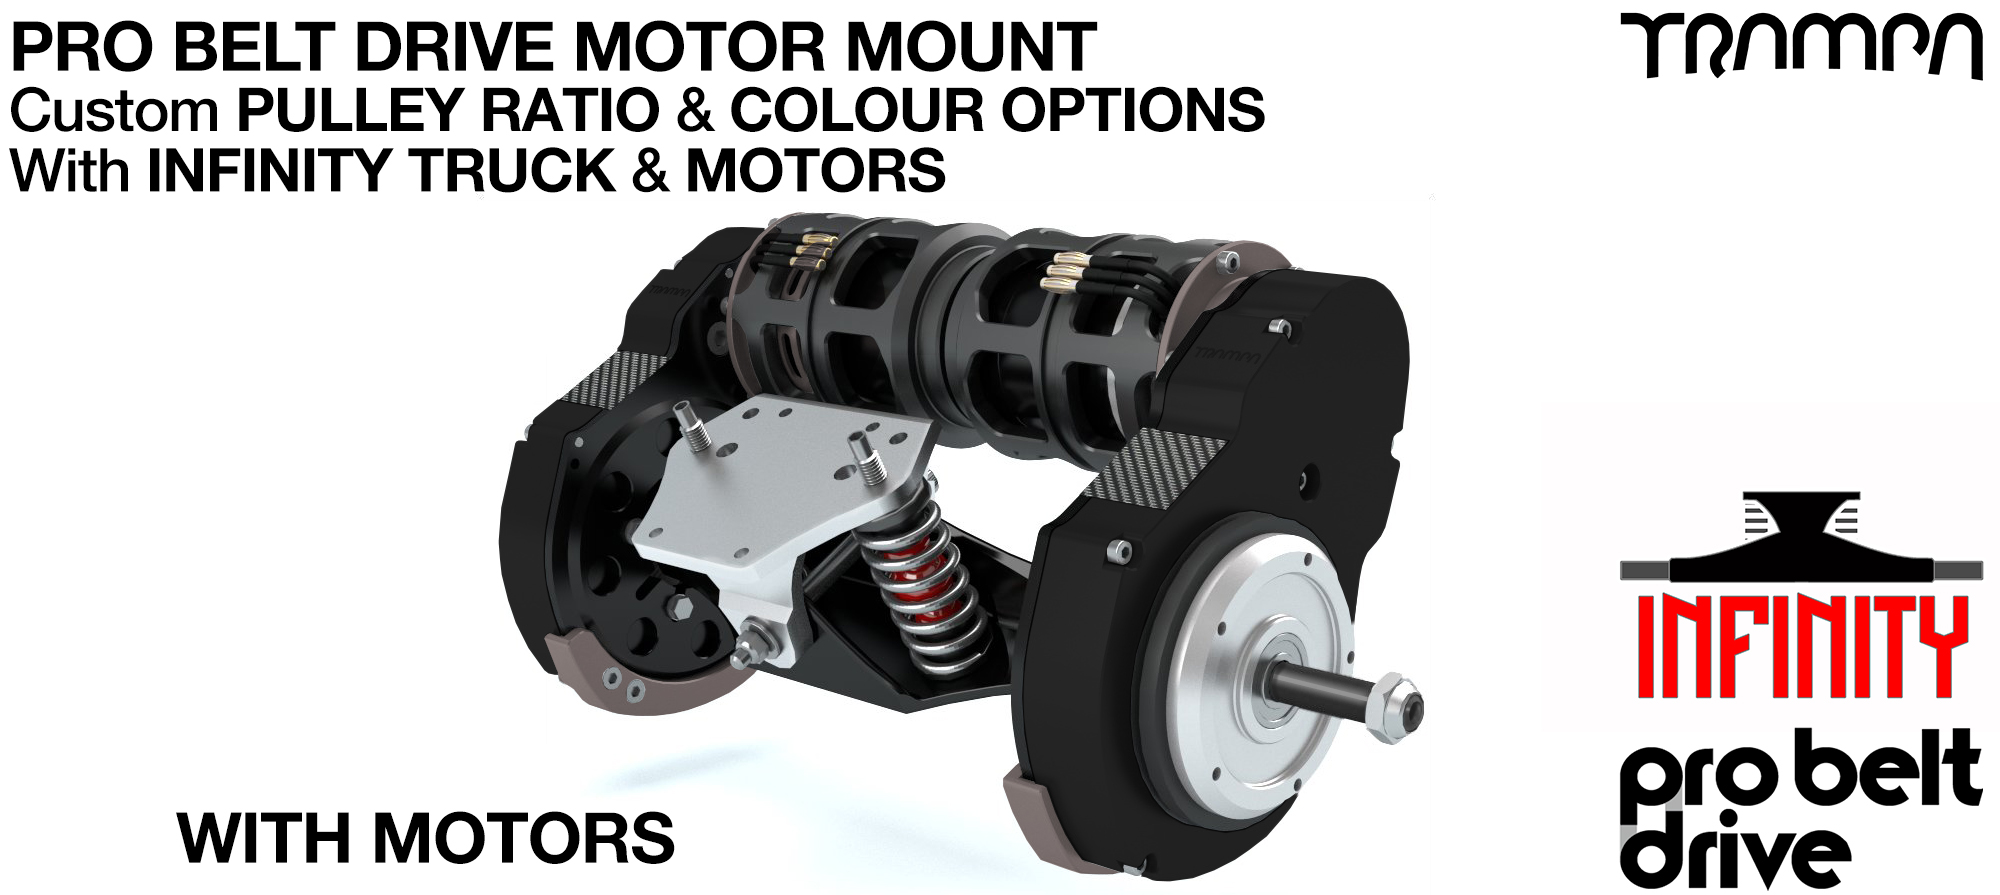 16mm PRO BELT DRIVE LOADED Motor Mounts MOTORS, PULLEYS & Motor PROTECTION FILTERS mounted on a CNC TRUCK